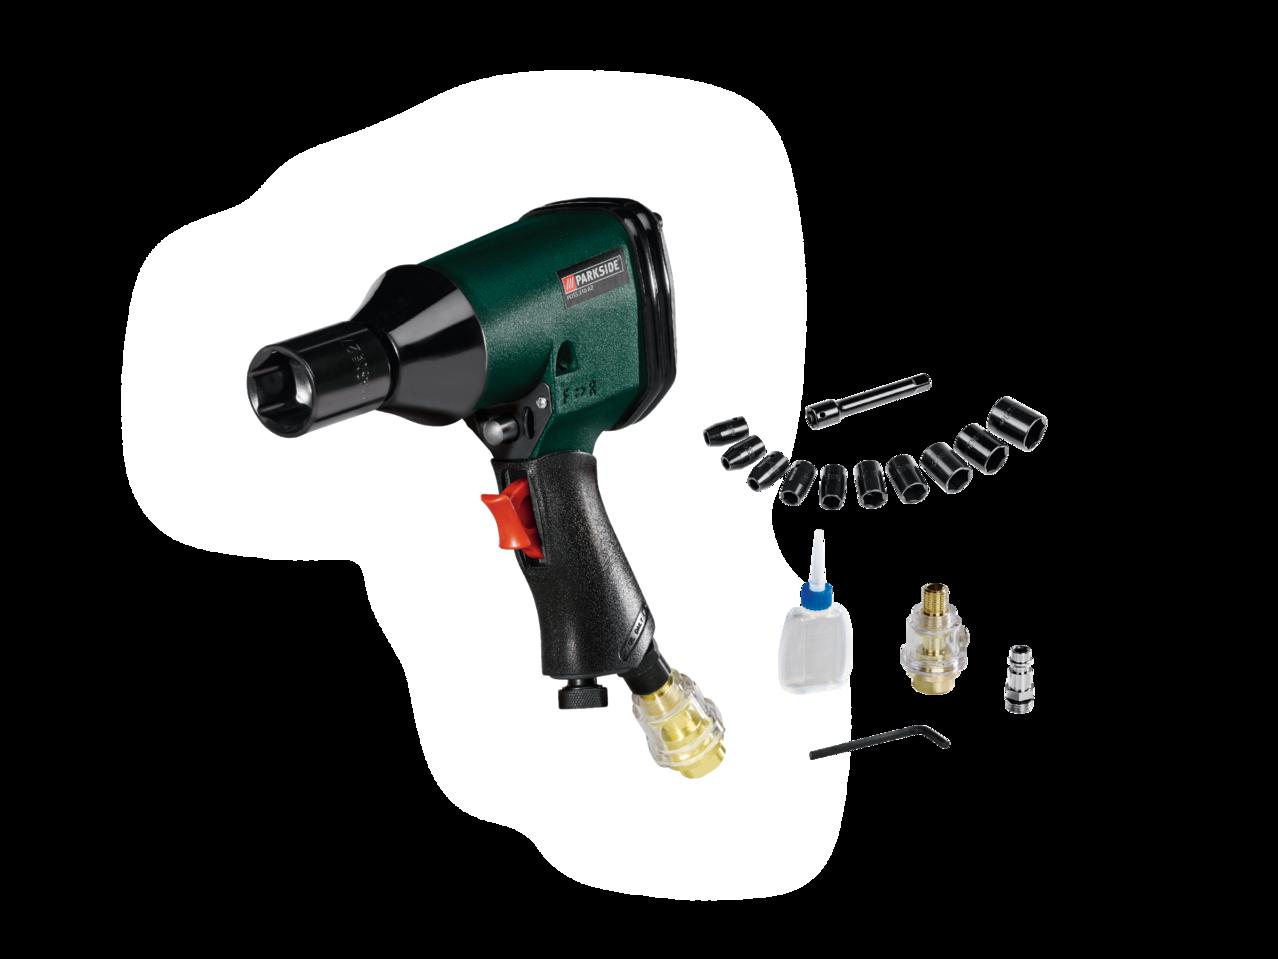 PARKSIDE(R) Pneumatic Impact Wrench Kit